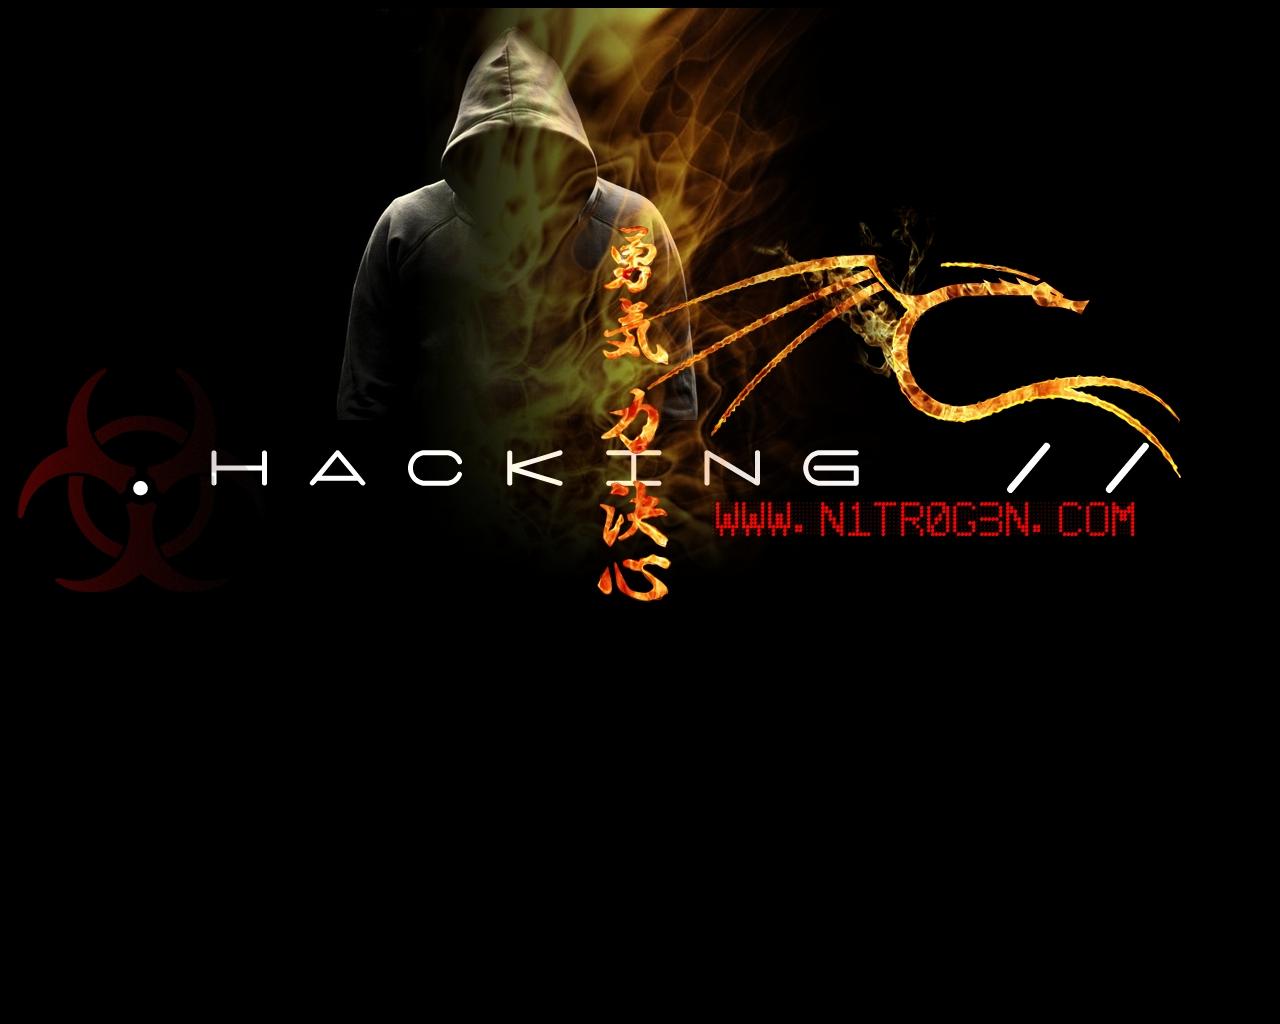 Ethical Hacking Wallpaper. Ethical Hacker Wallpaper, Ethical Hacking Wallpaper and Ethical PowerPoint Background